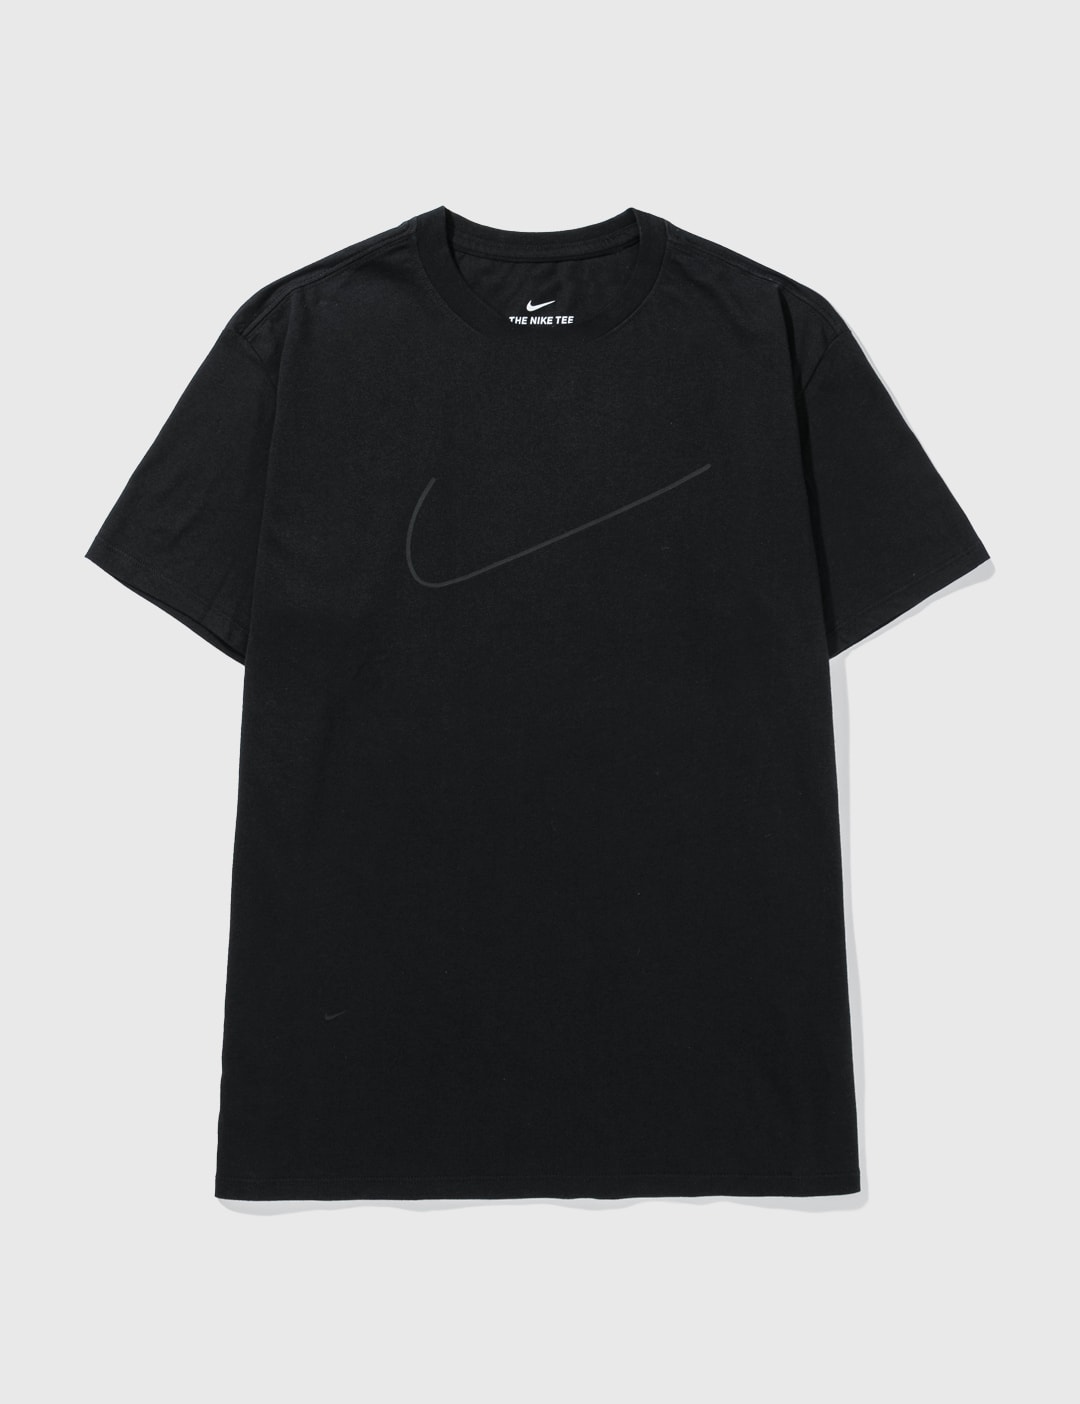 Sangriento asentamiento Panorama Nike Lab - NIKE X MMW TONAL SWOOSH LOGO T-SHIRT | HBX - Globally Curated  Fashion and Lifestyle by Hypebeast